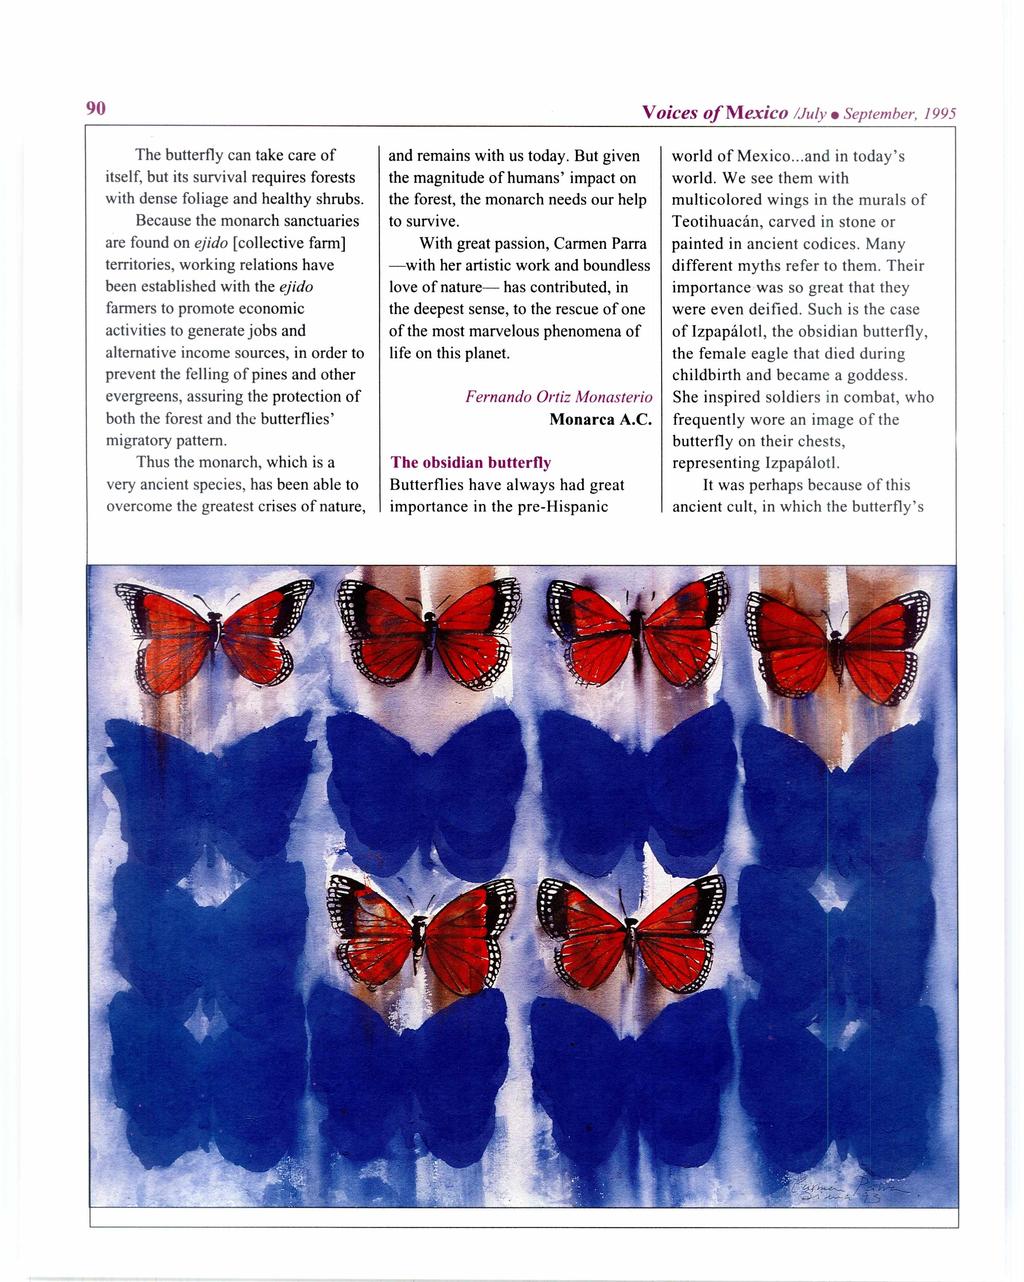 90 Voices of Mexico /July September, 1995 The butterfly can take tare of itself, but its survival requires forests with dense foliage and healthy shrubs.